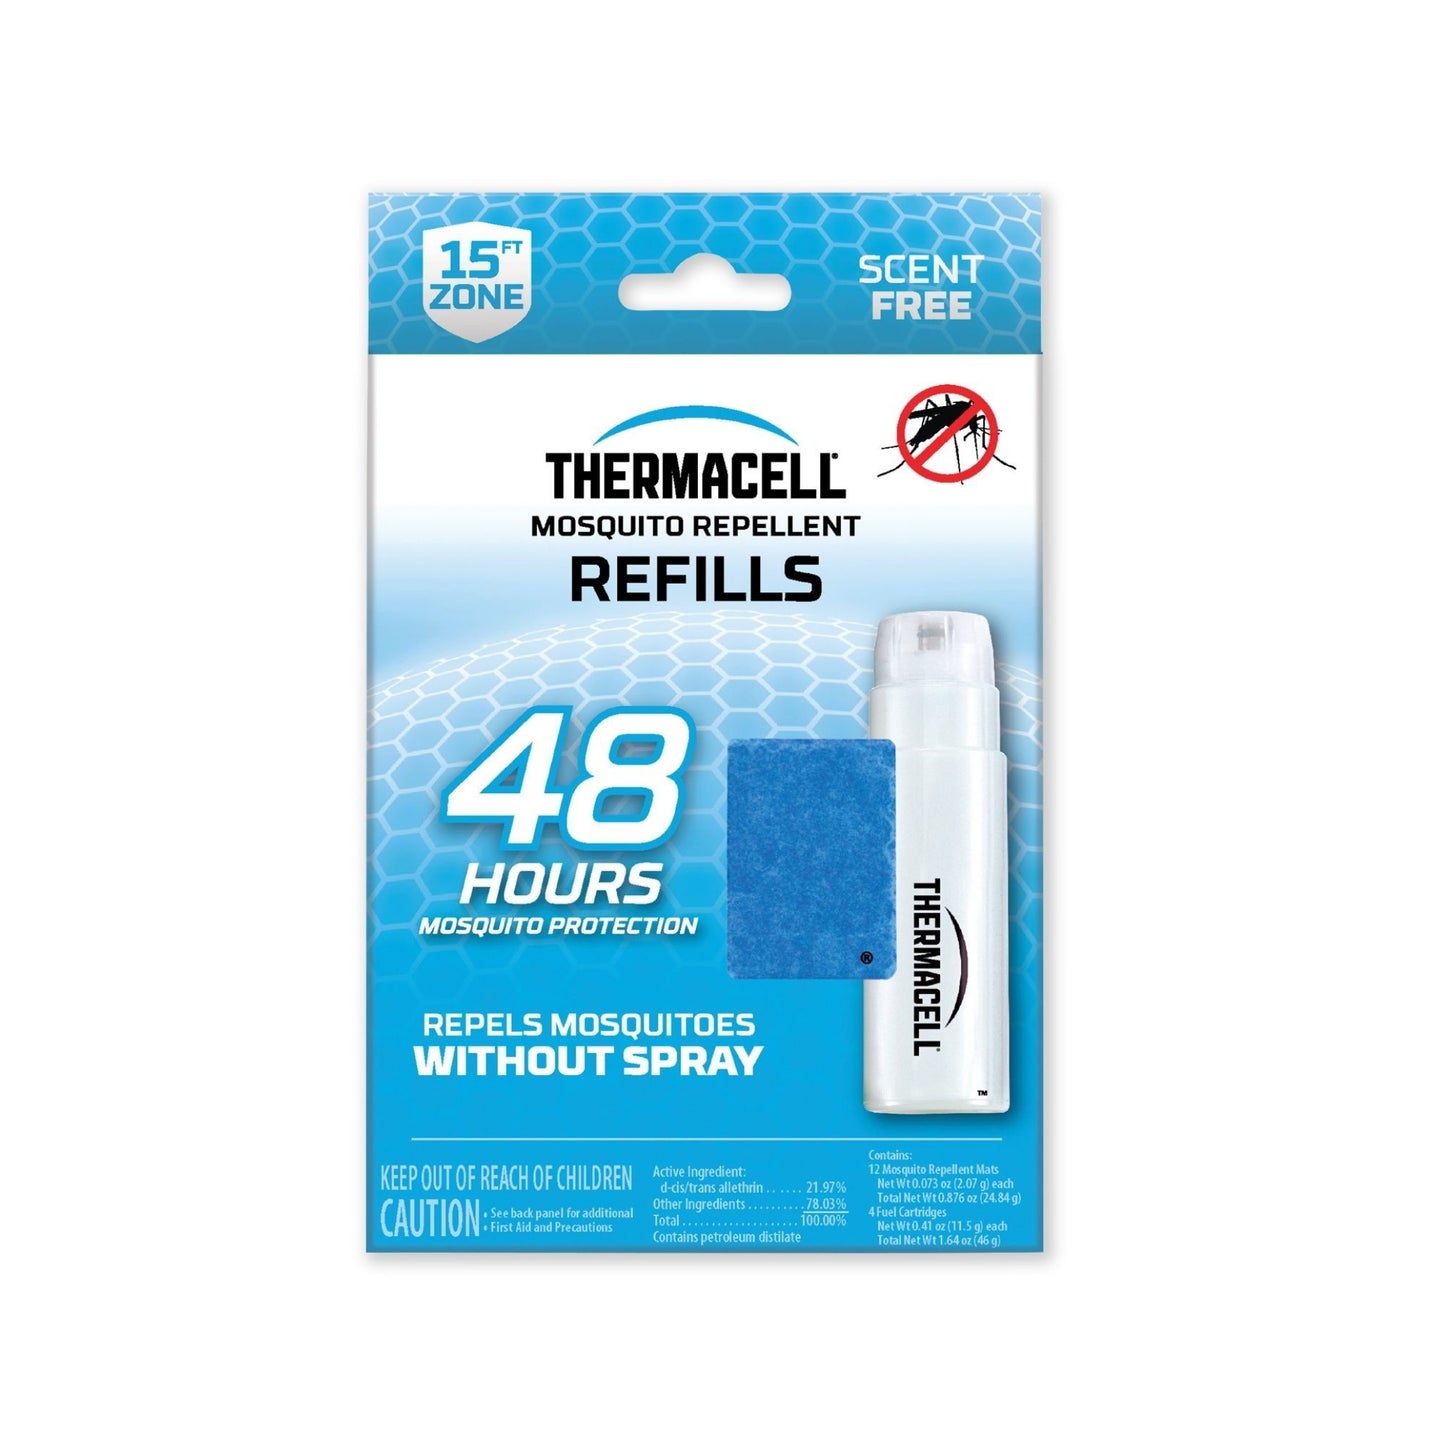 THERMACELL MOSQUITO REPELLENT REFILLS